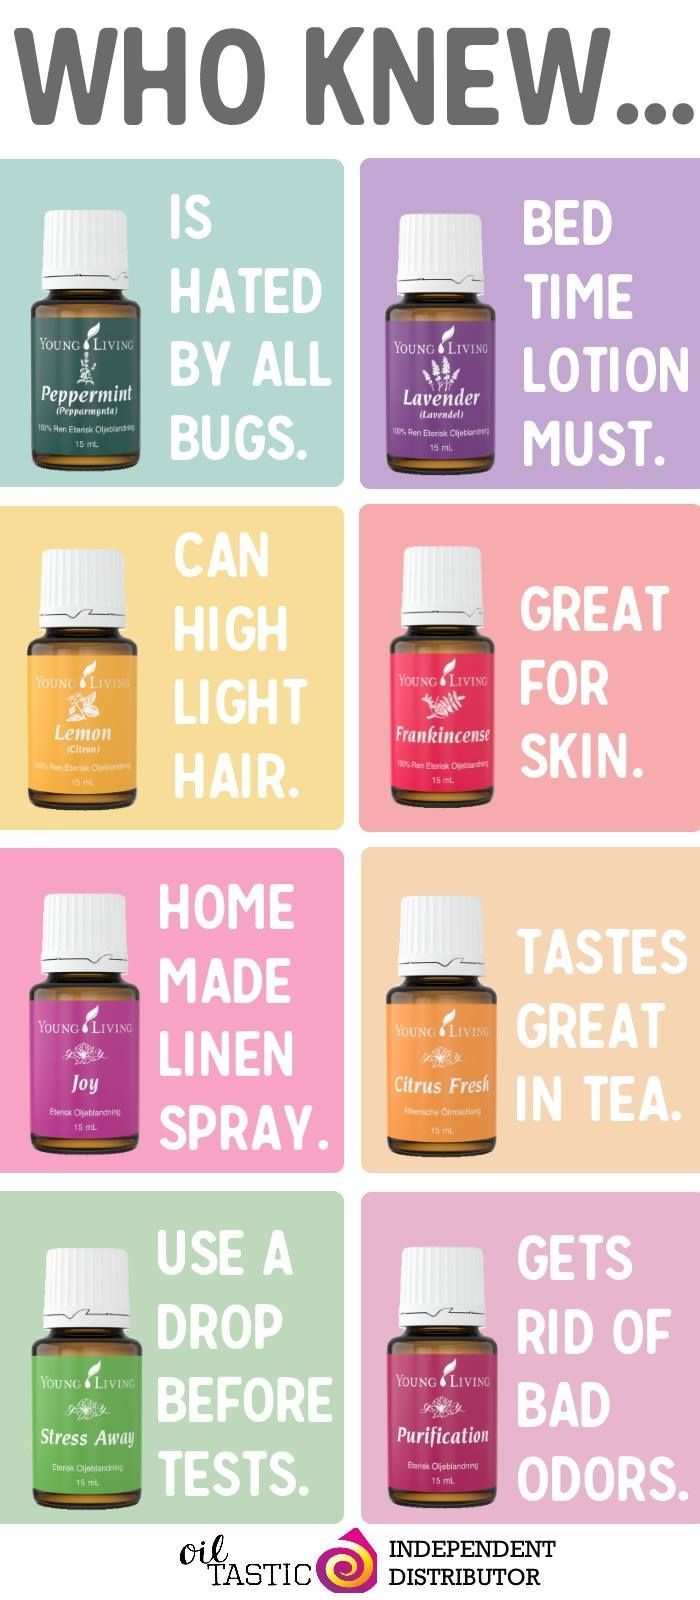 Ways to Use Your Essential Oils *Saving this for later. Great resource for getting started.